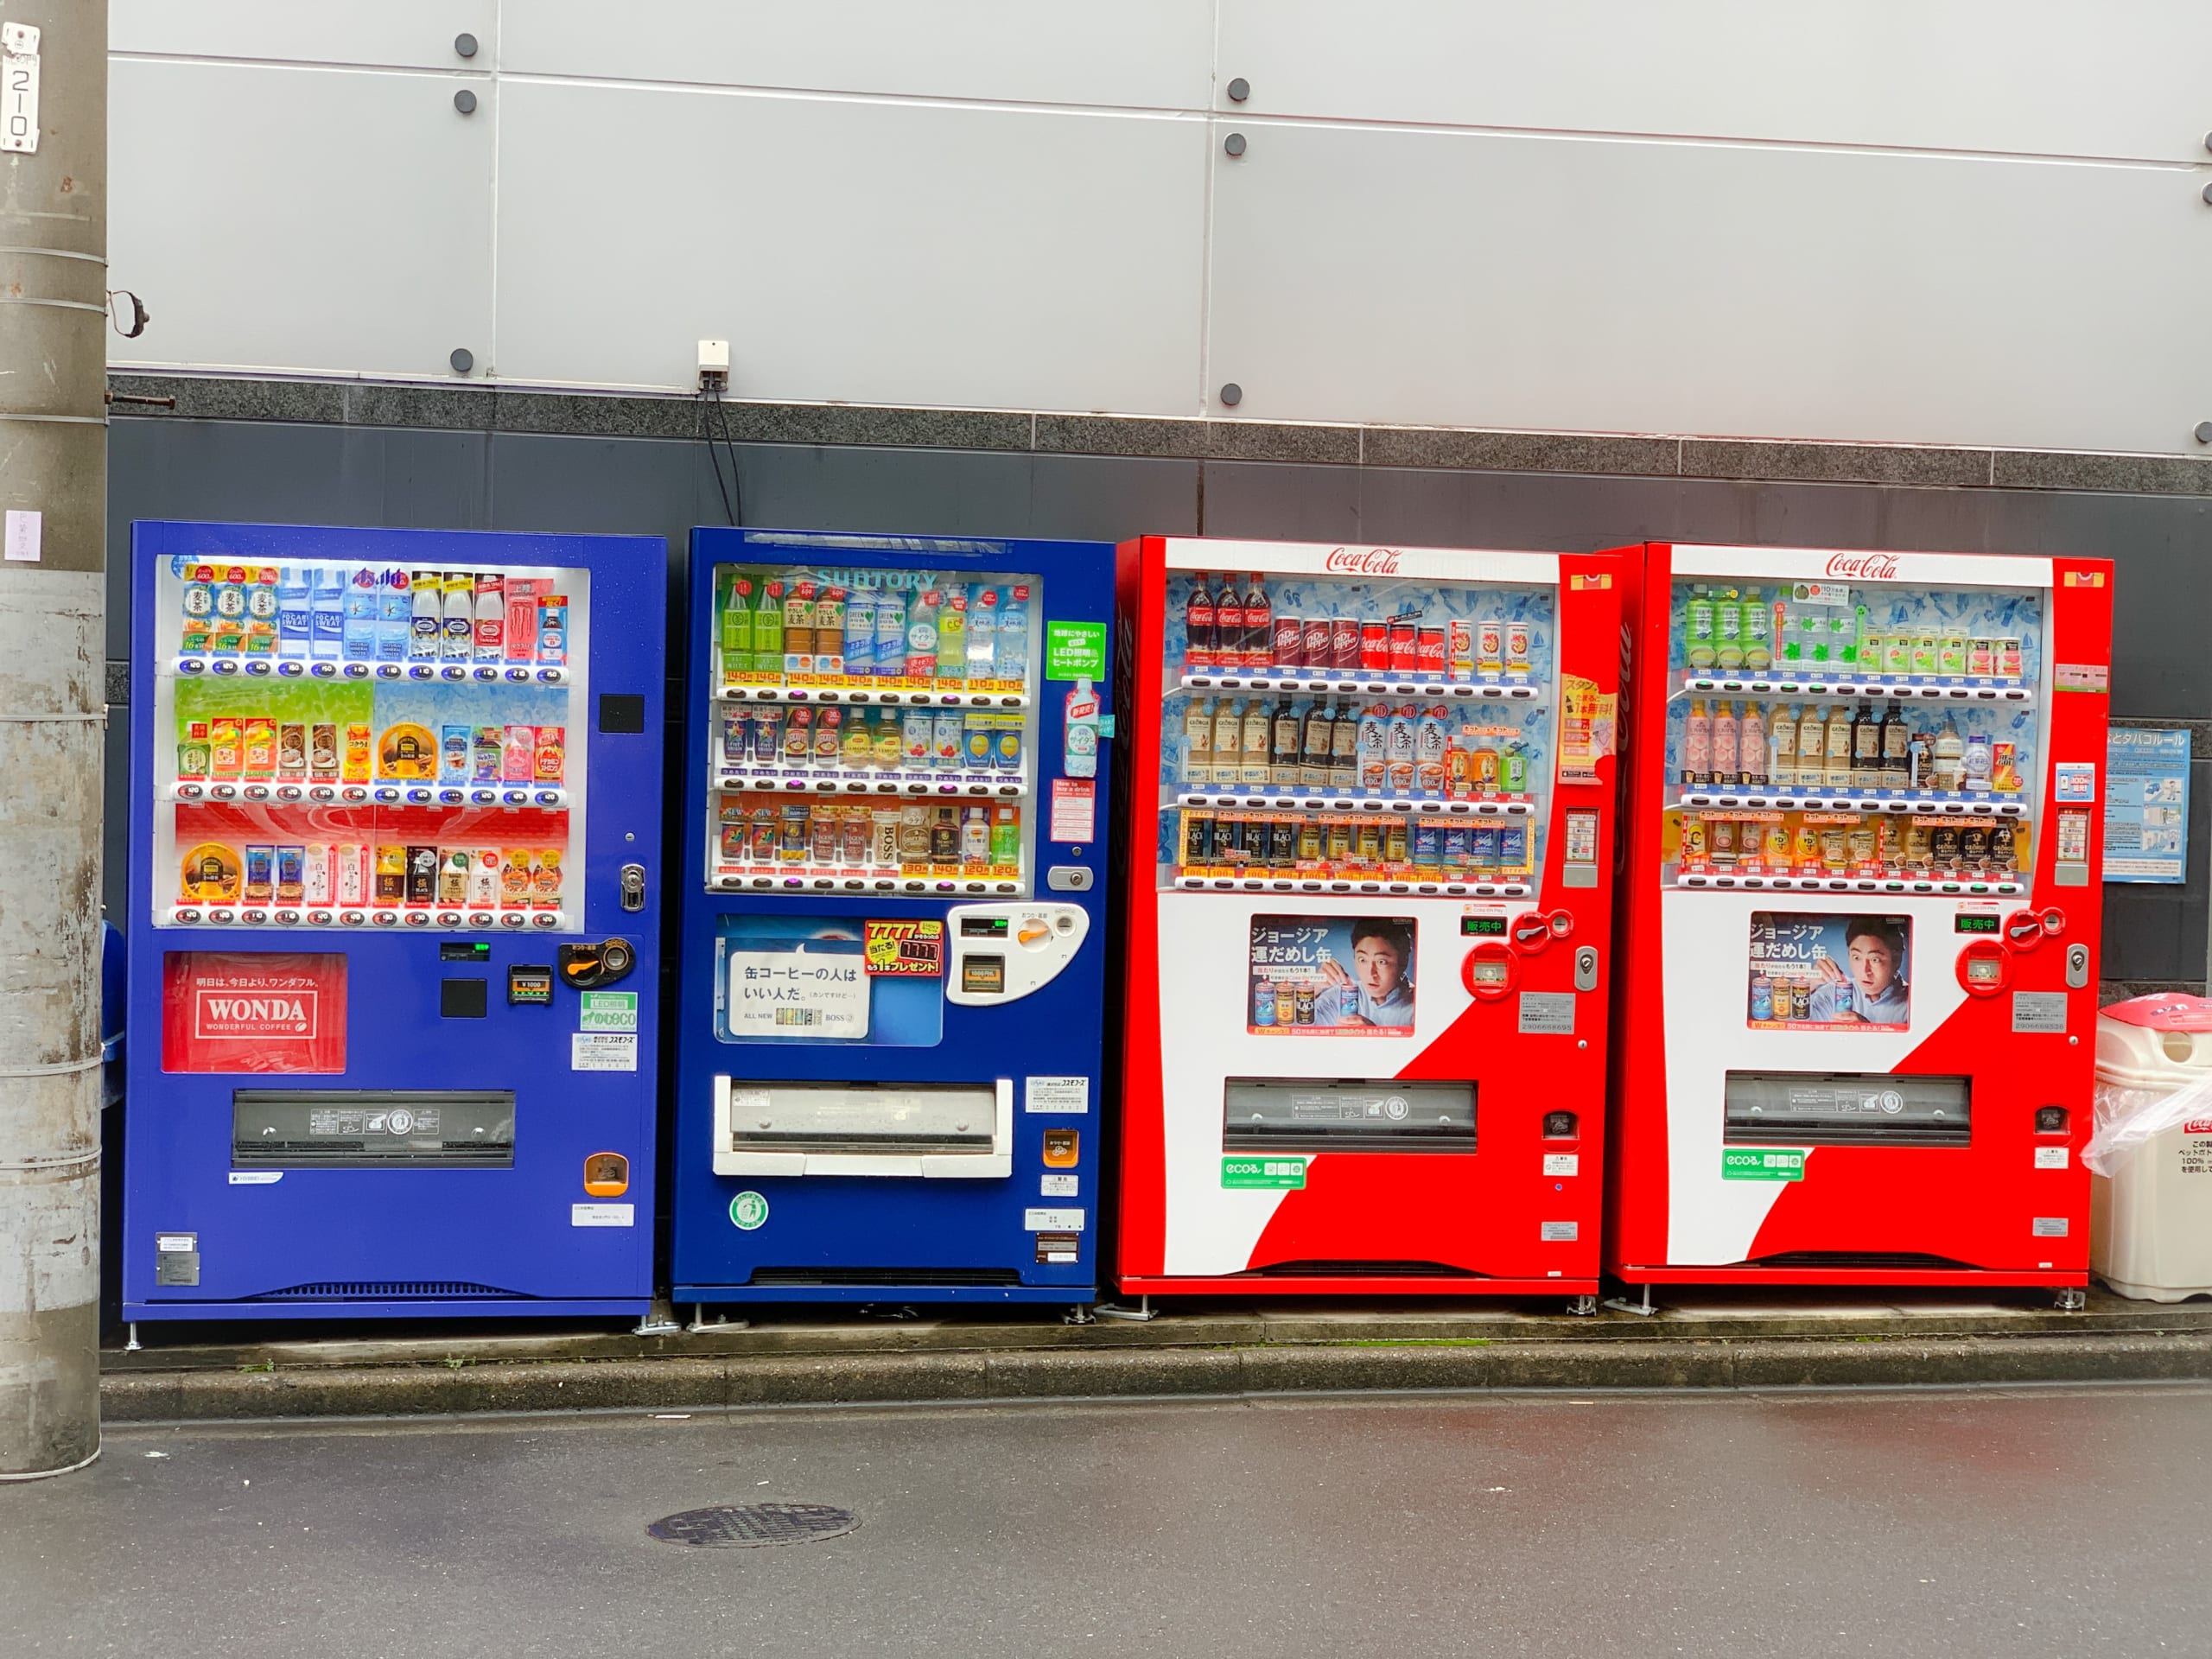 Affordable Vending Machines for Sale: Snack, Drink, & More